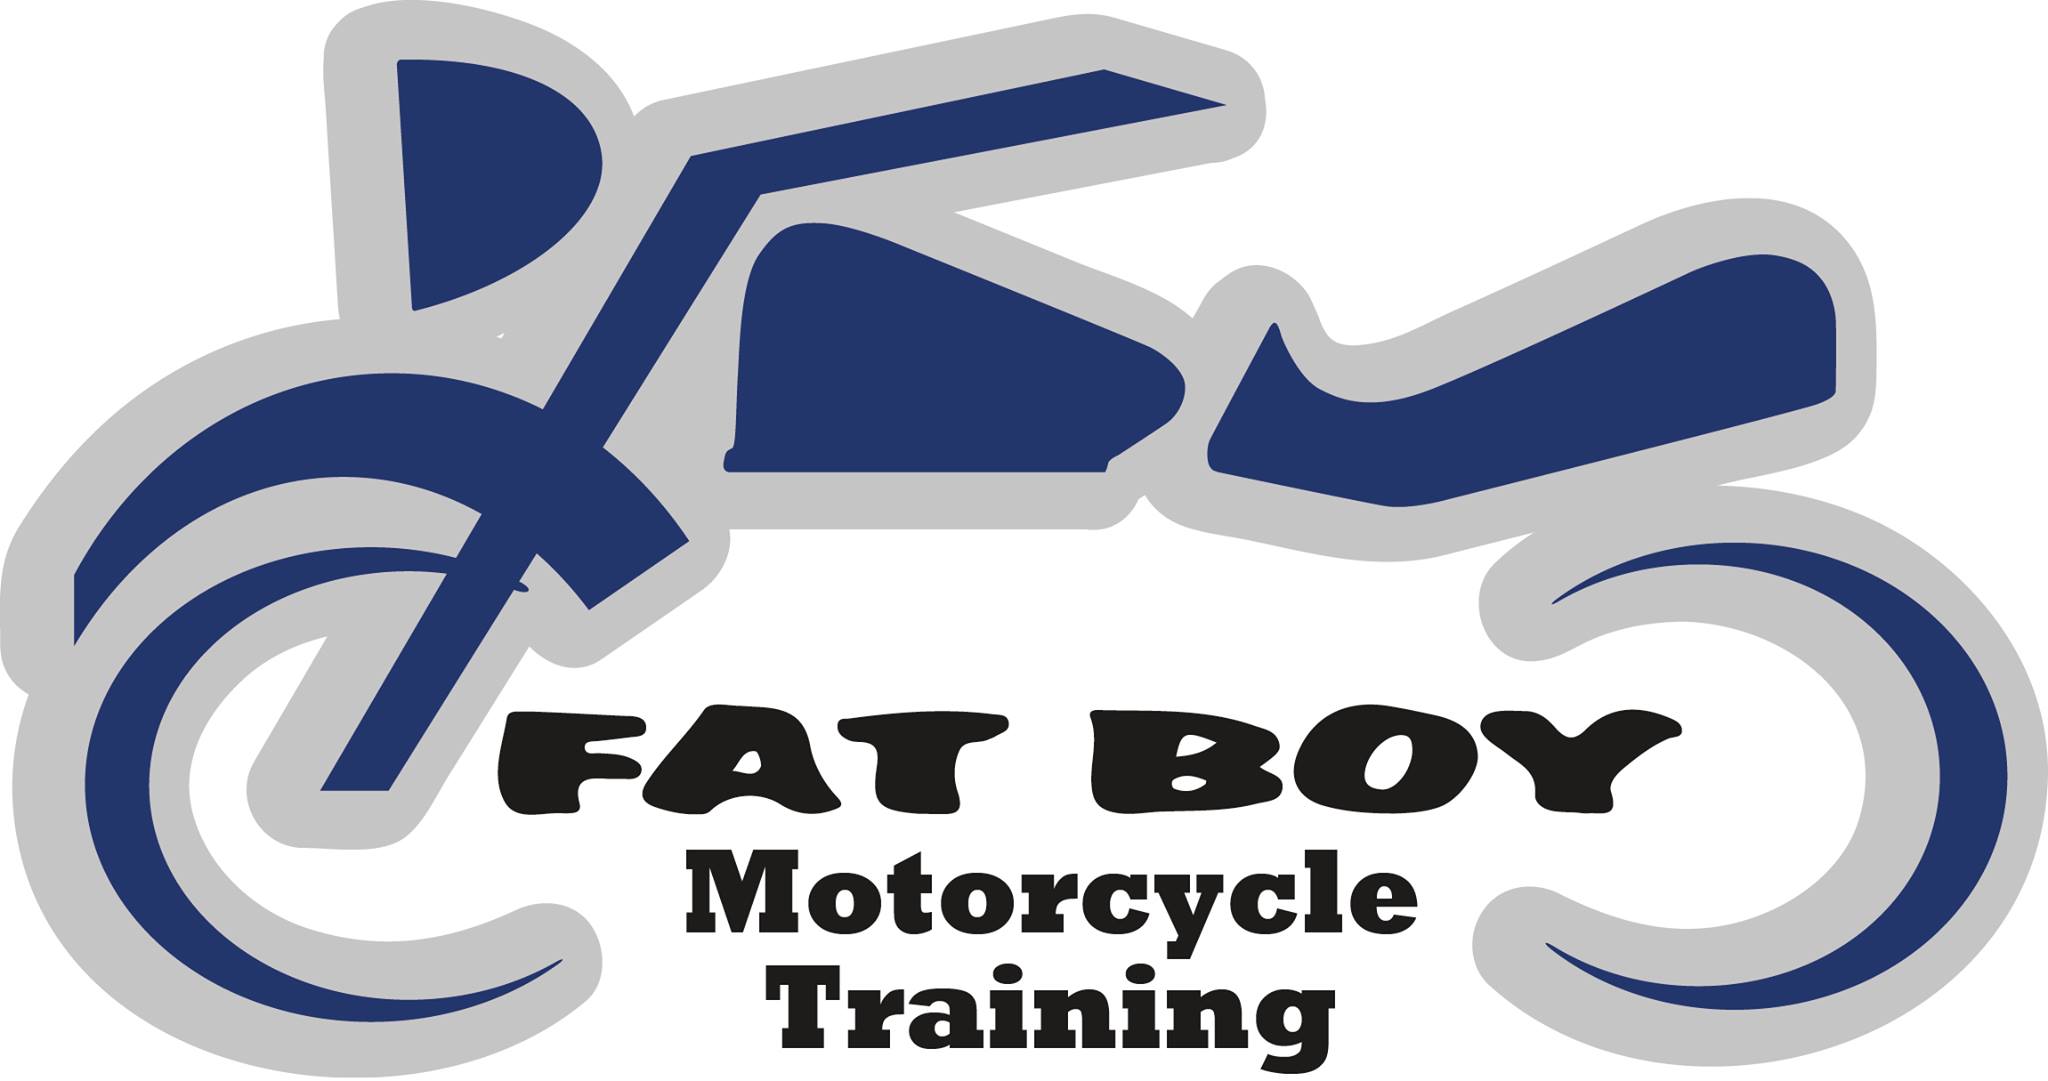 Fatboy Motorcycle Training in Southampton